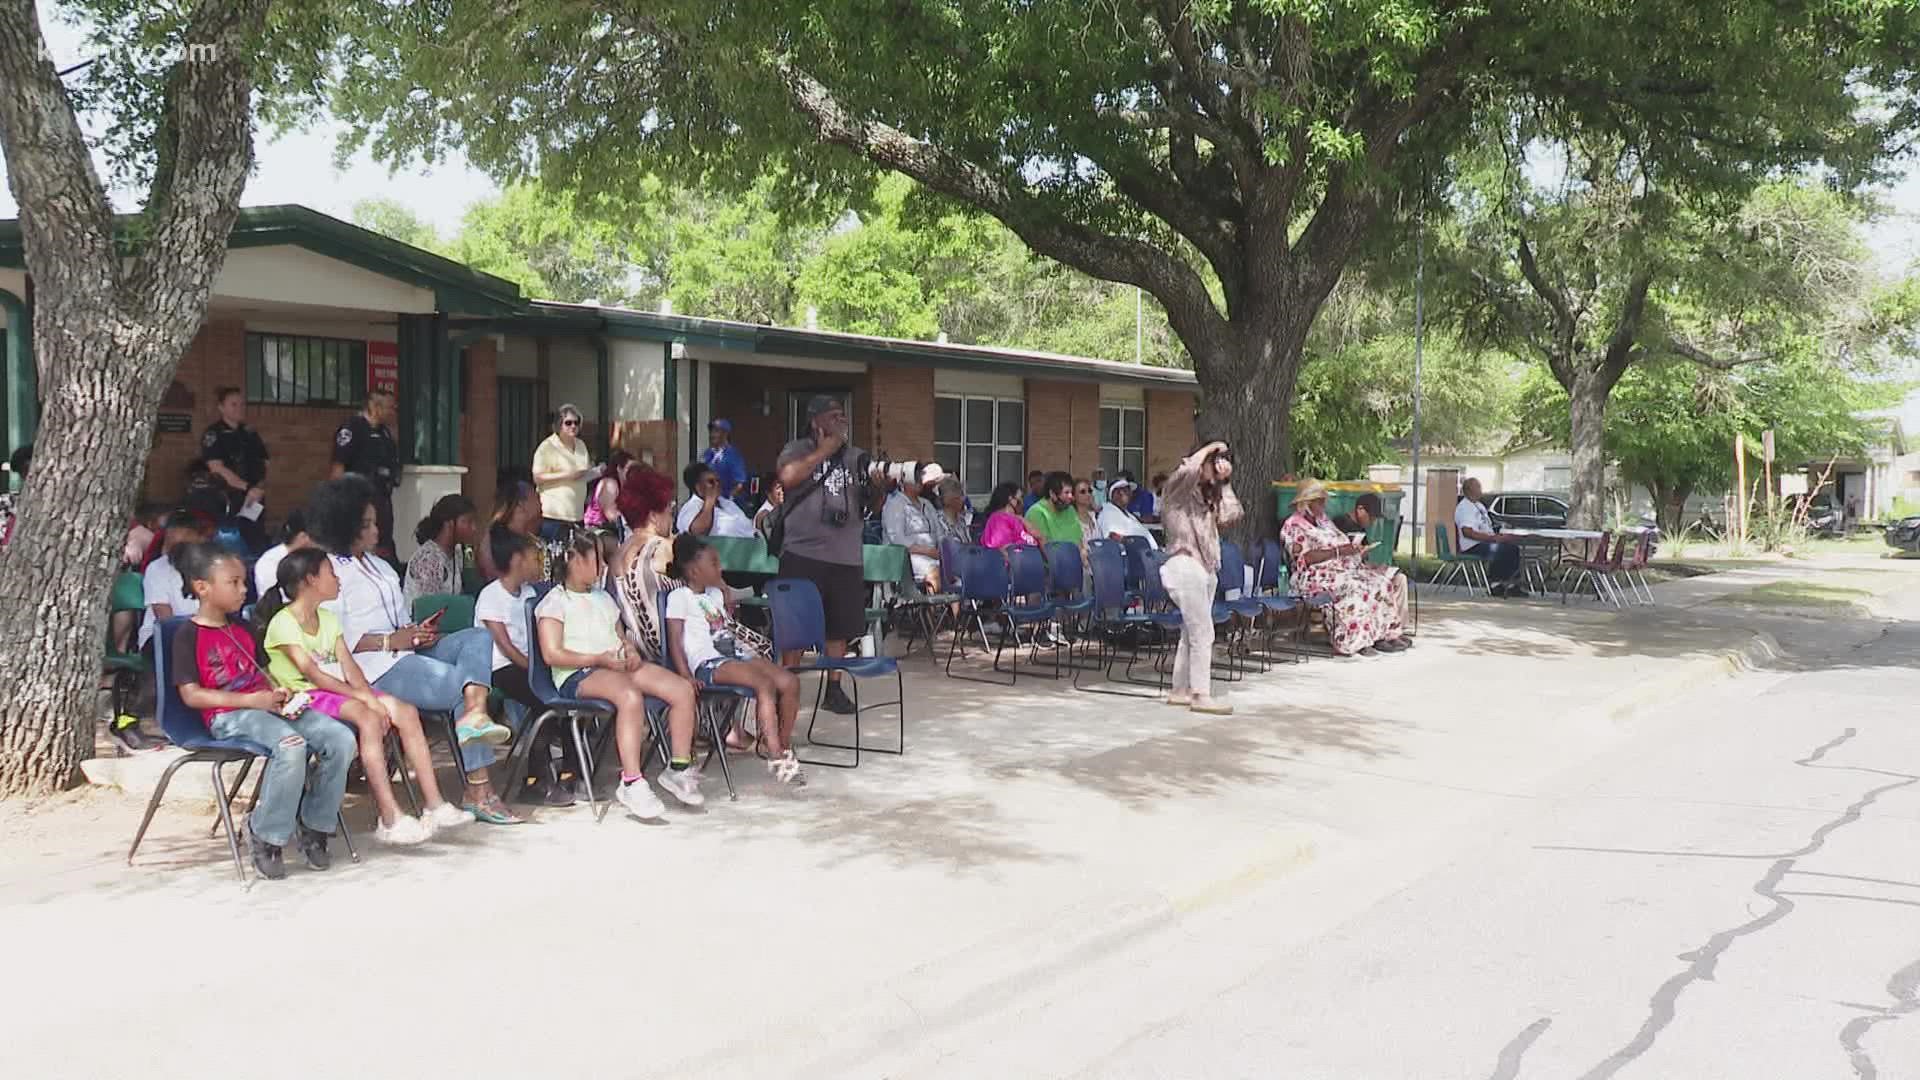 Juneteenth celebrations kicked off with the Road to Freedom Program in Temple.